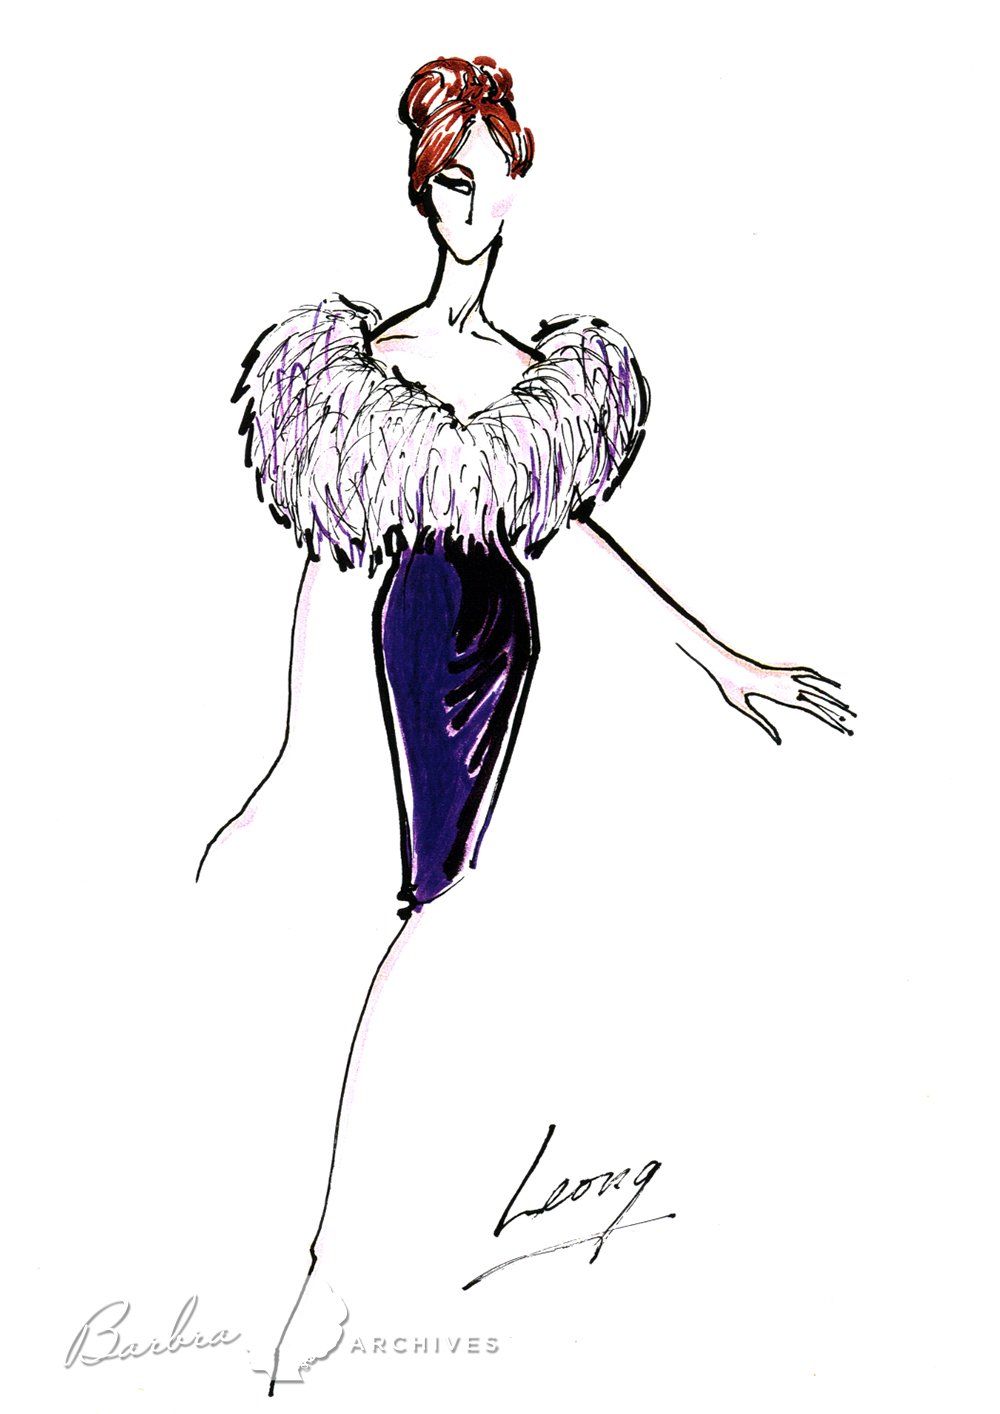 Illustration of Streisand cabaret outfit by Terry Leong